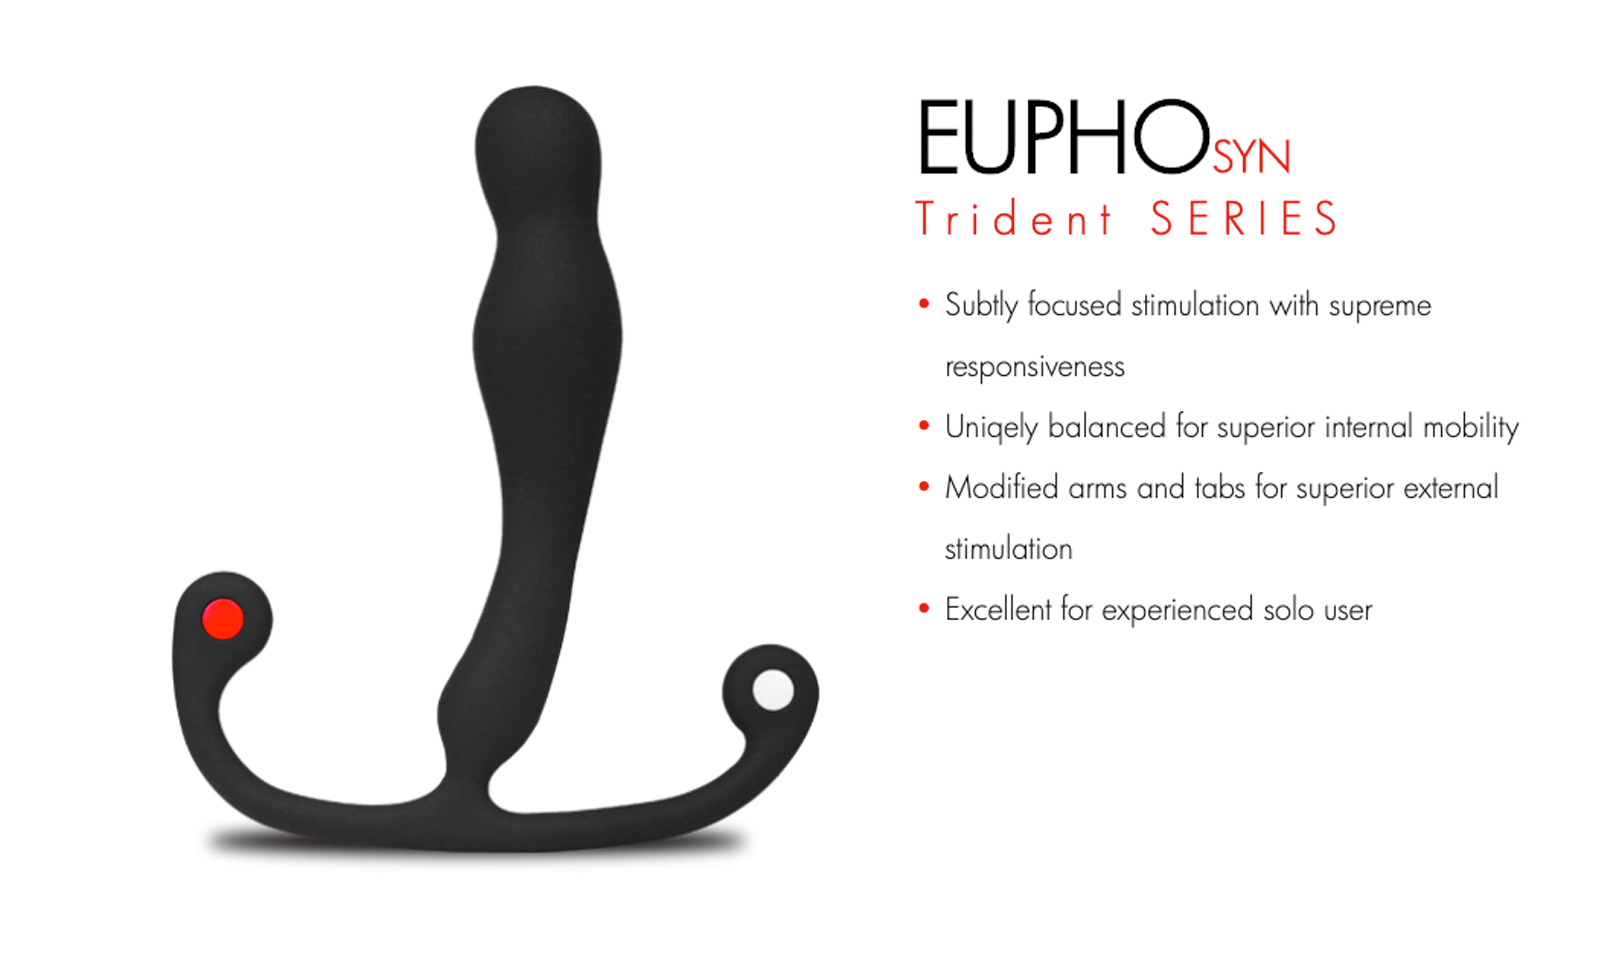 Eupho Syn Trident Shipping Now from Aneros